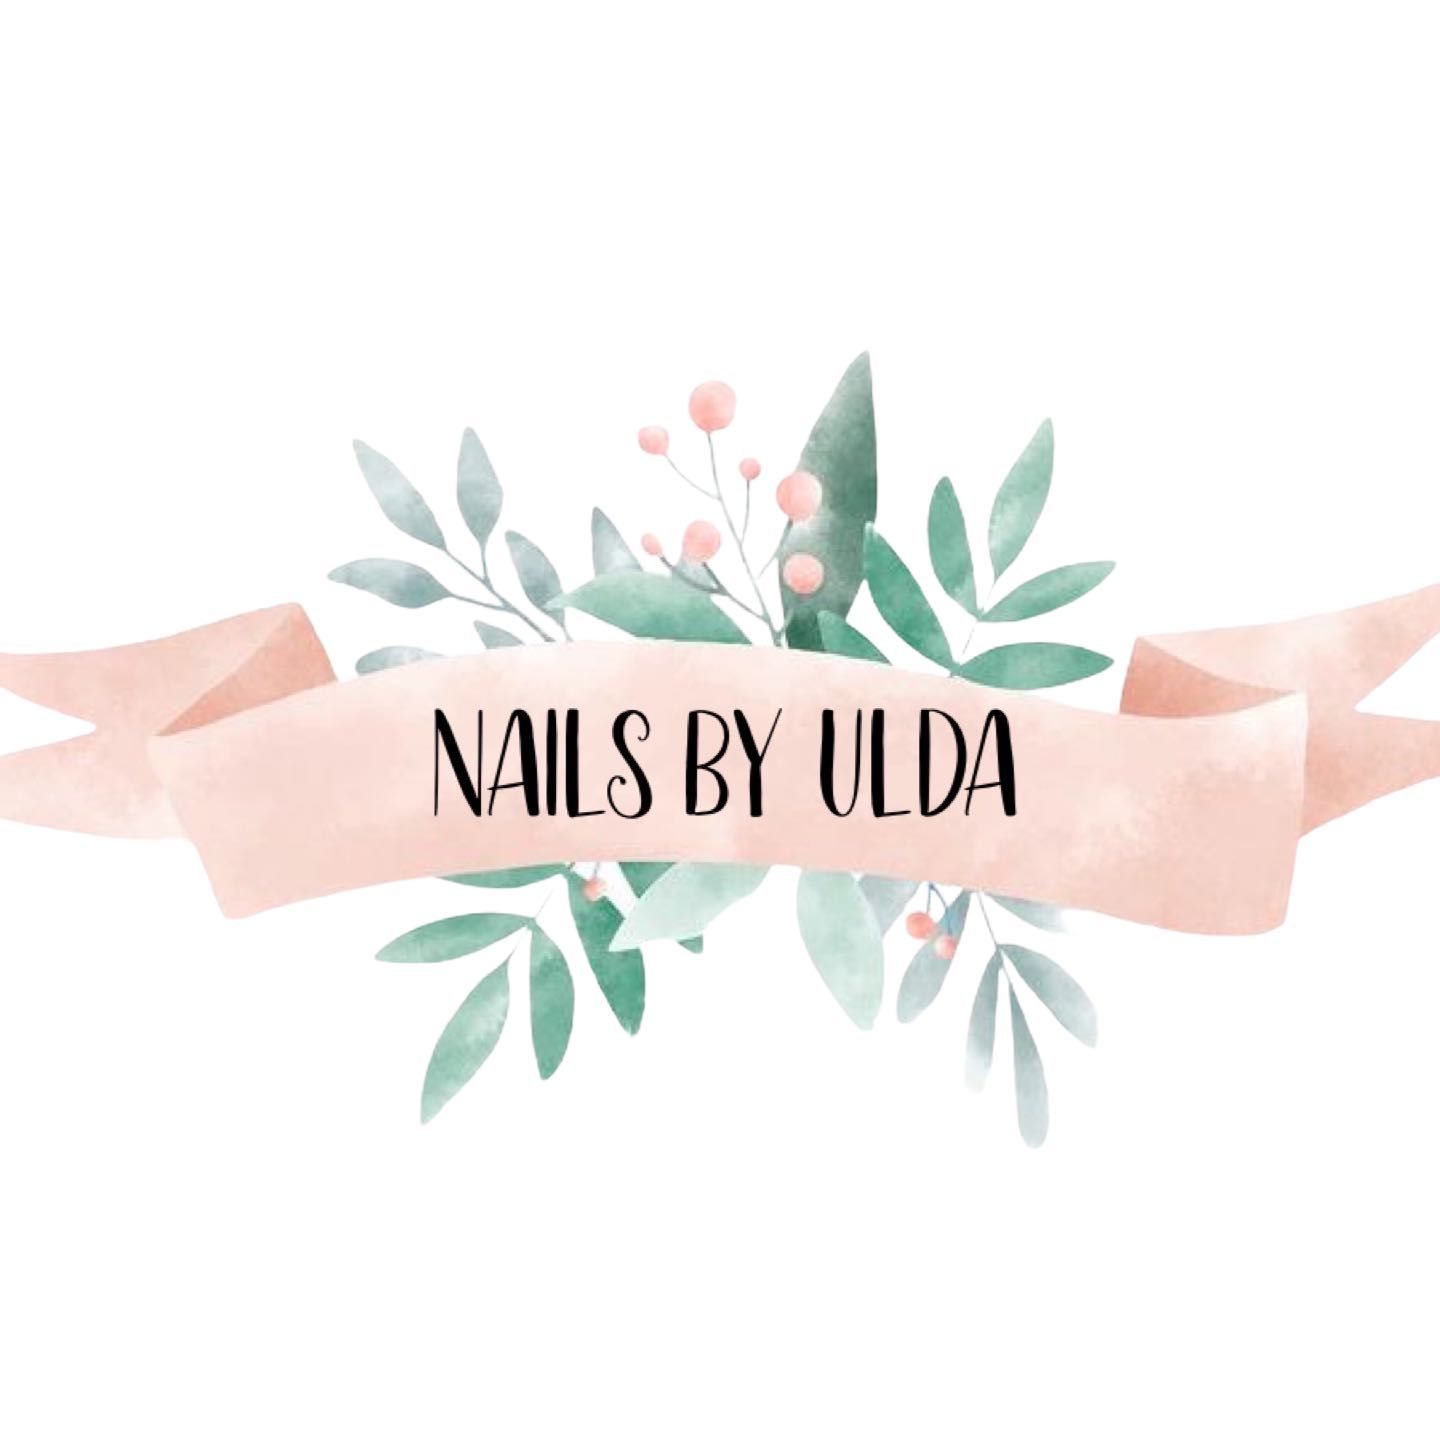 Nails by Ulda / Ulda’s Professional Beauty LLC💅🏼, 75 NE 44th St, Suite #1, Suite 1, Oakland Park, 33334